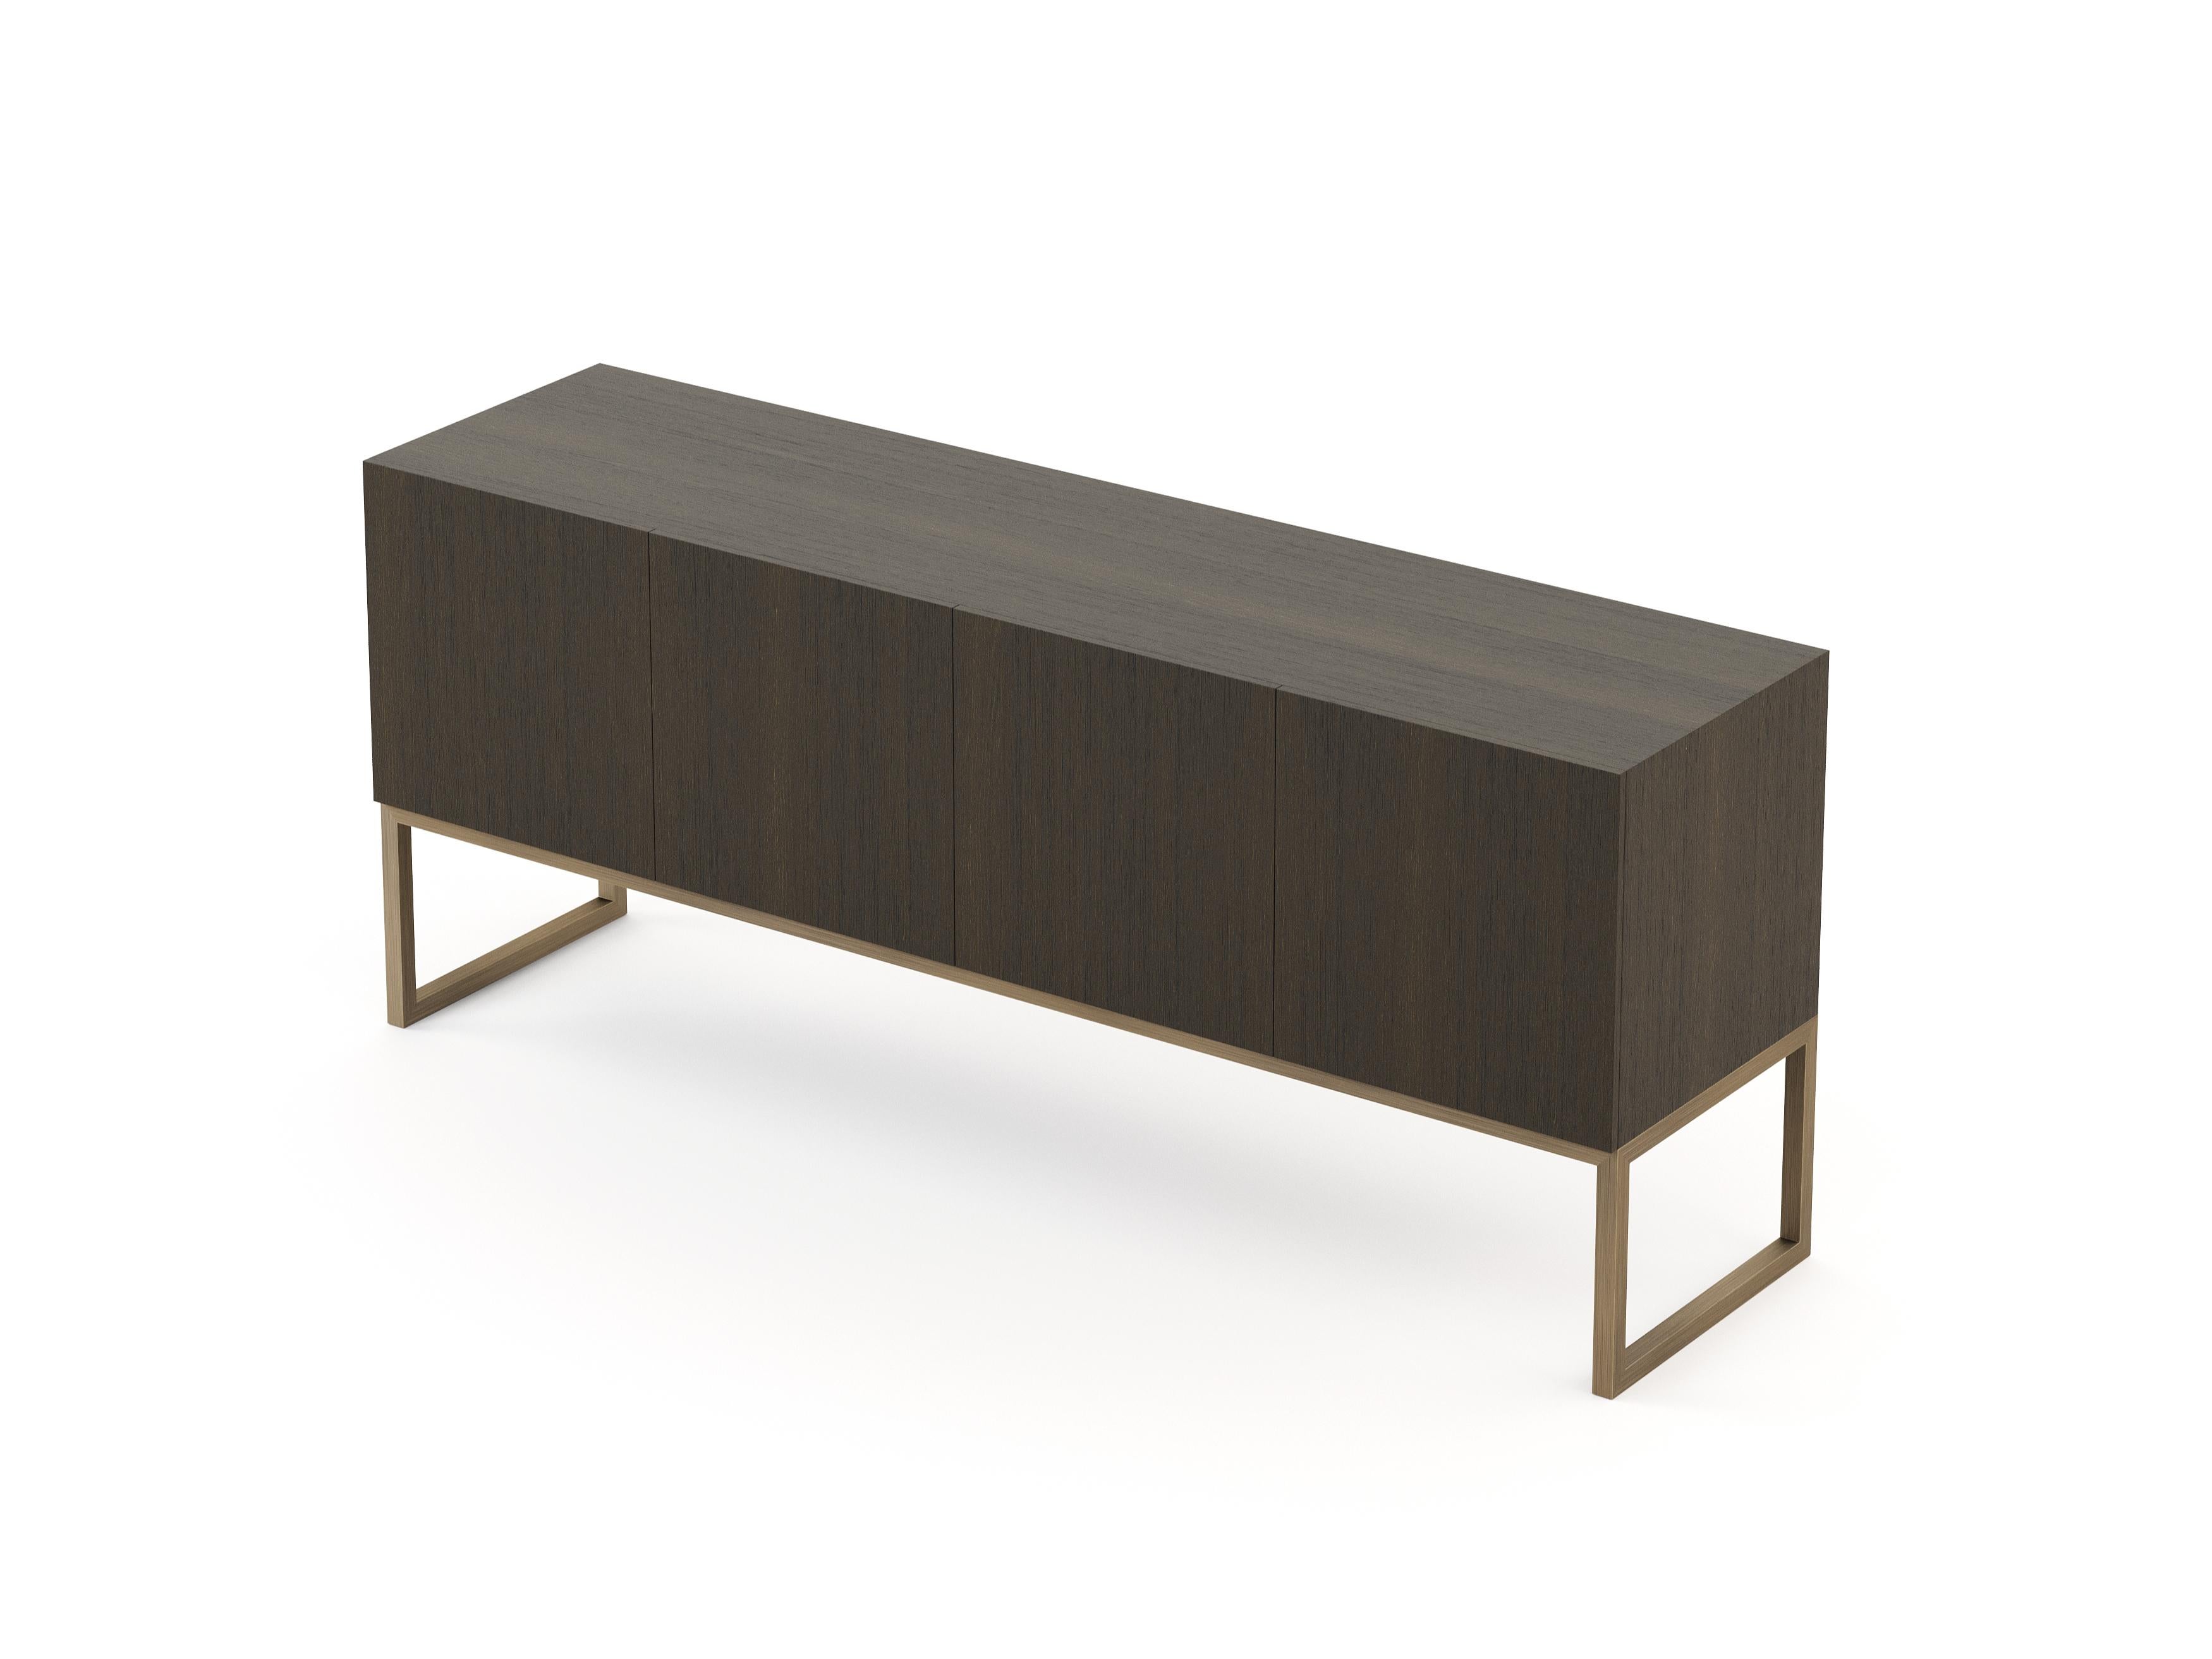 Portuguese Modern Slender Sideboard Made with Oak and Brass, Handmade by Stylish Club For Sale